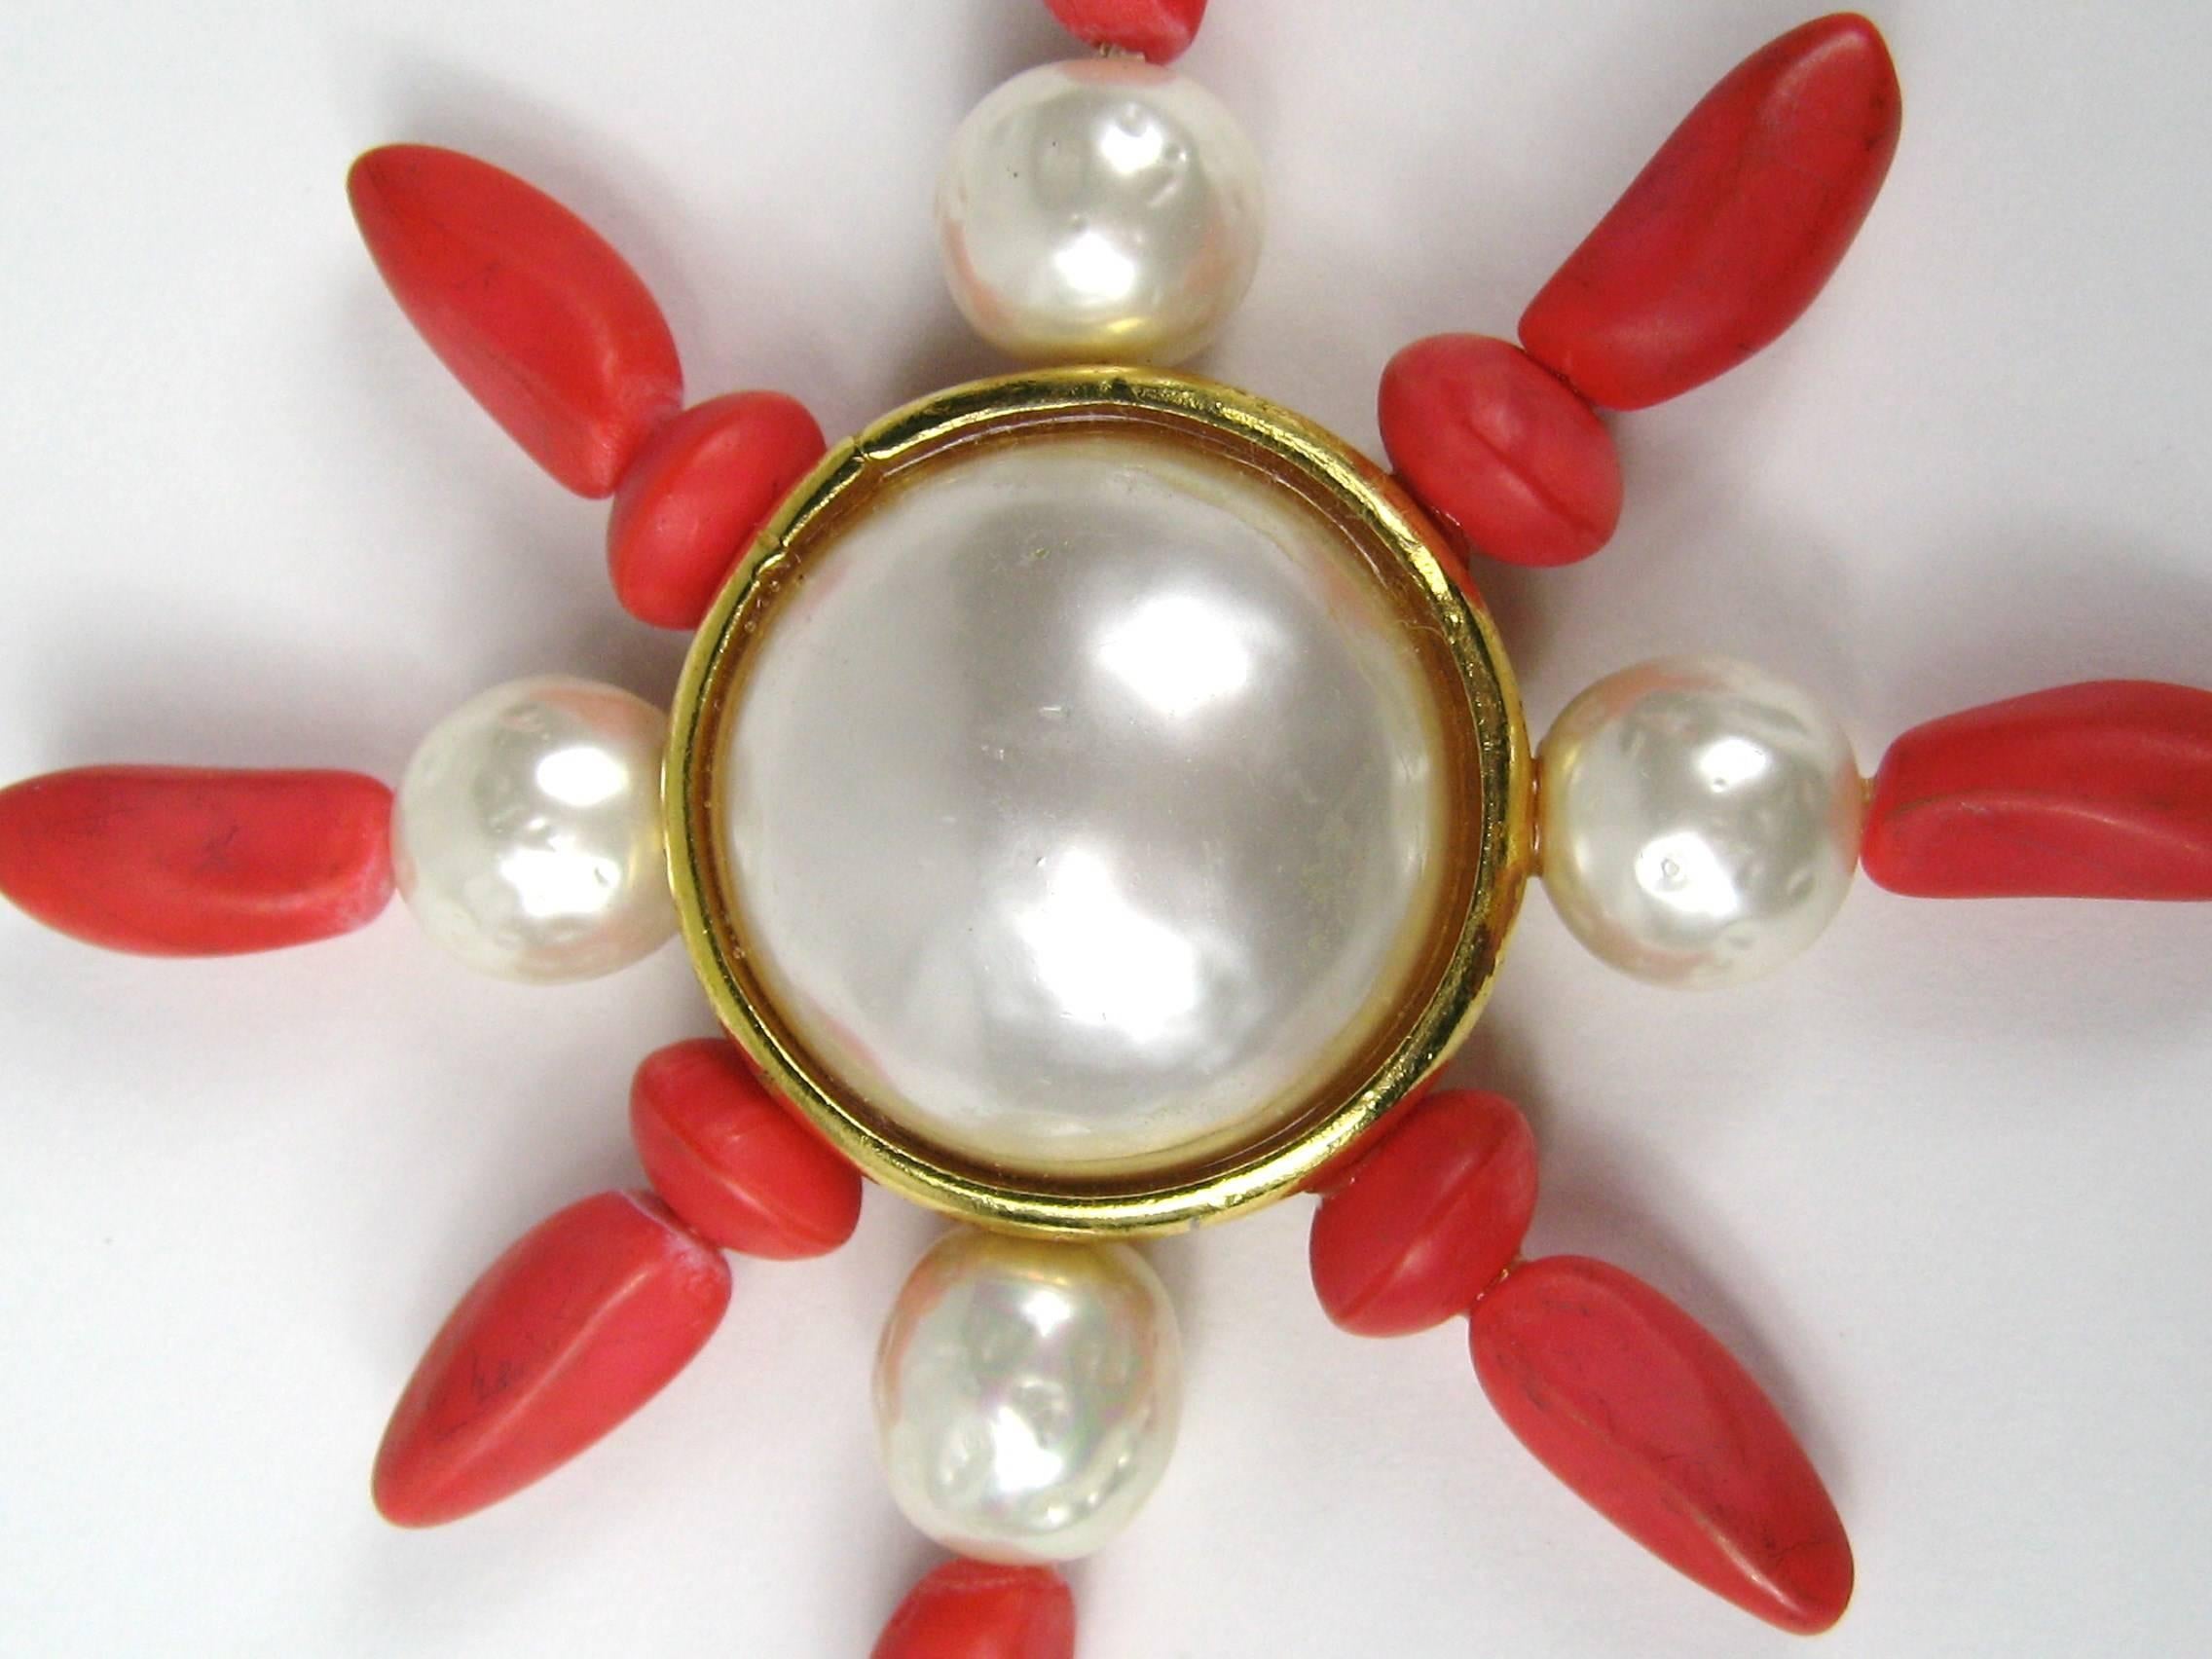 Aurientis Large Coral colored with Baroque Pearl center and accent. Measures 3.80 in  Made in France. Dominique Aurientis started her career in the Dior atelier, moving on to the houses of Chanel, Givenchy, Lavin, Ferragamo, Pucci and Celine. This